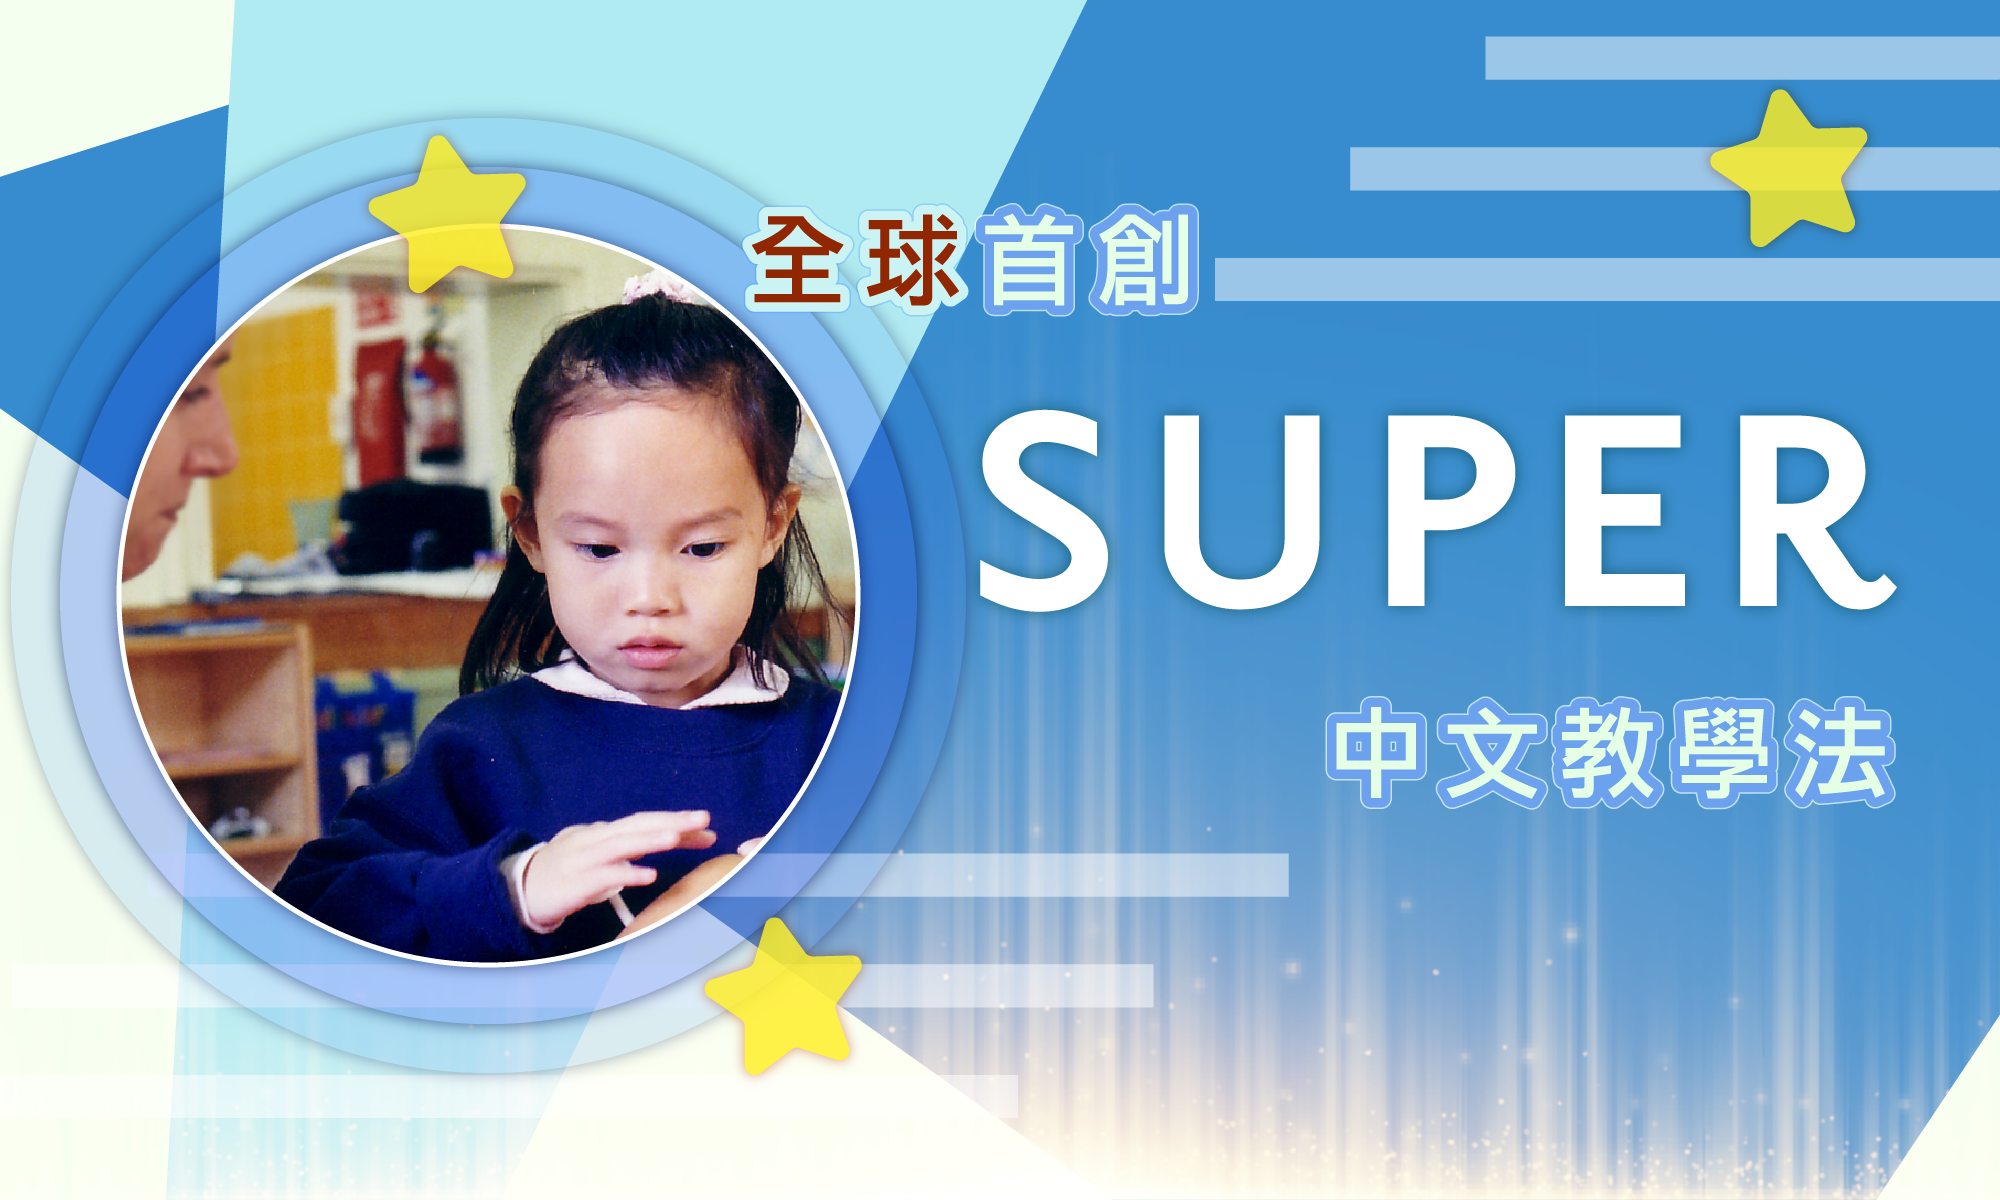 Sagebooks Hongkong brings you a scientific SUPER approach to learning Chinese.